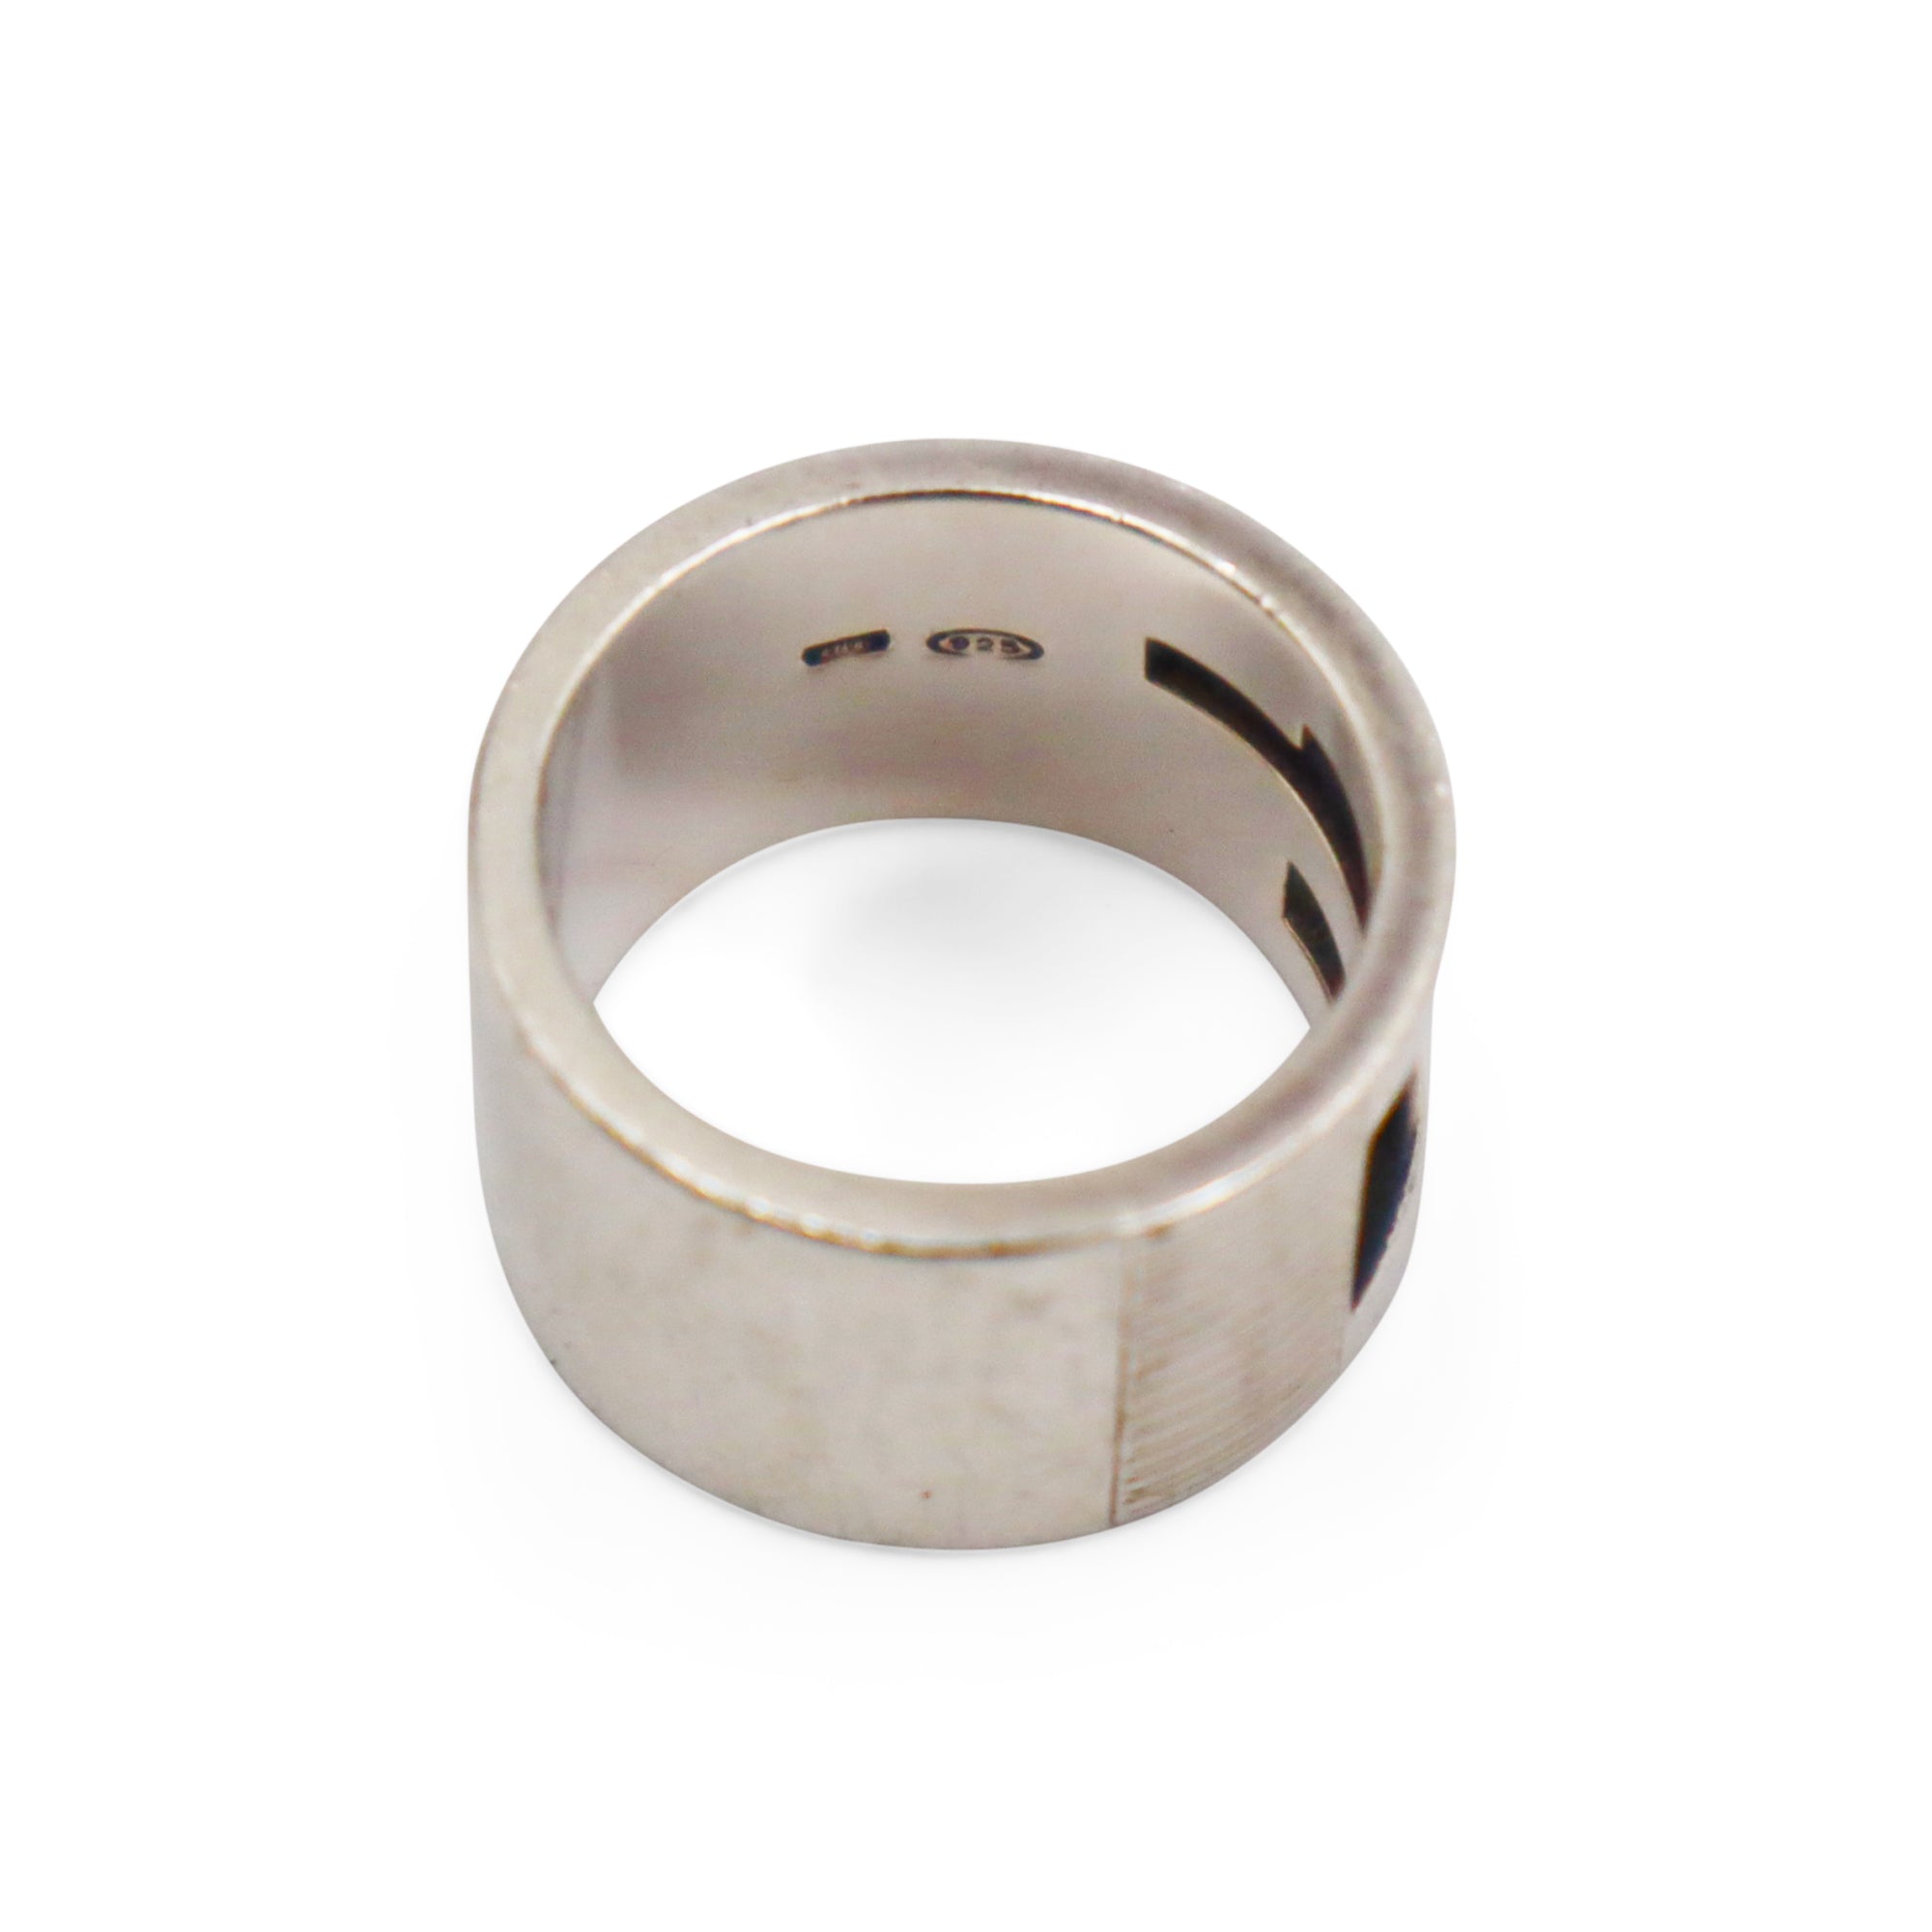 Gucci Branded G Wide Silver Ring